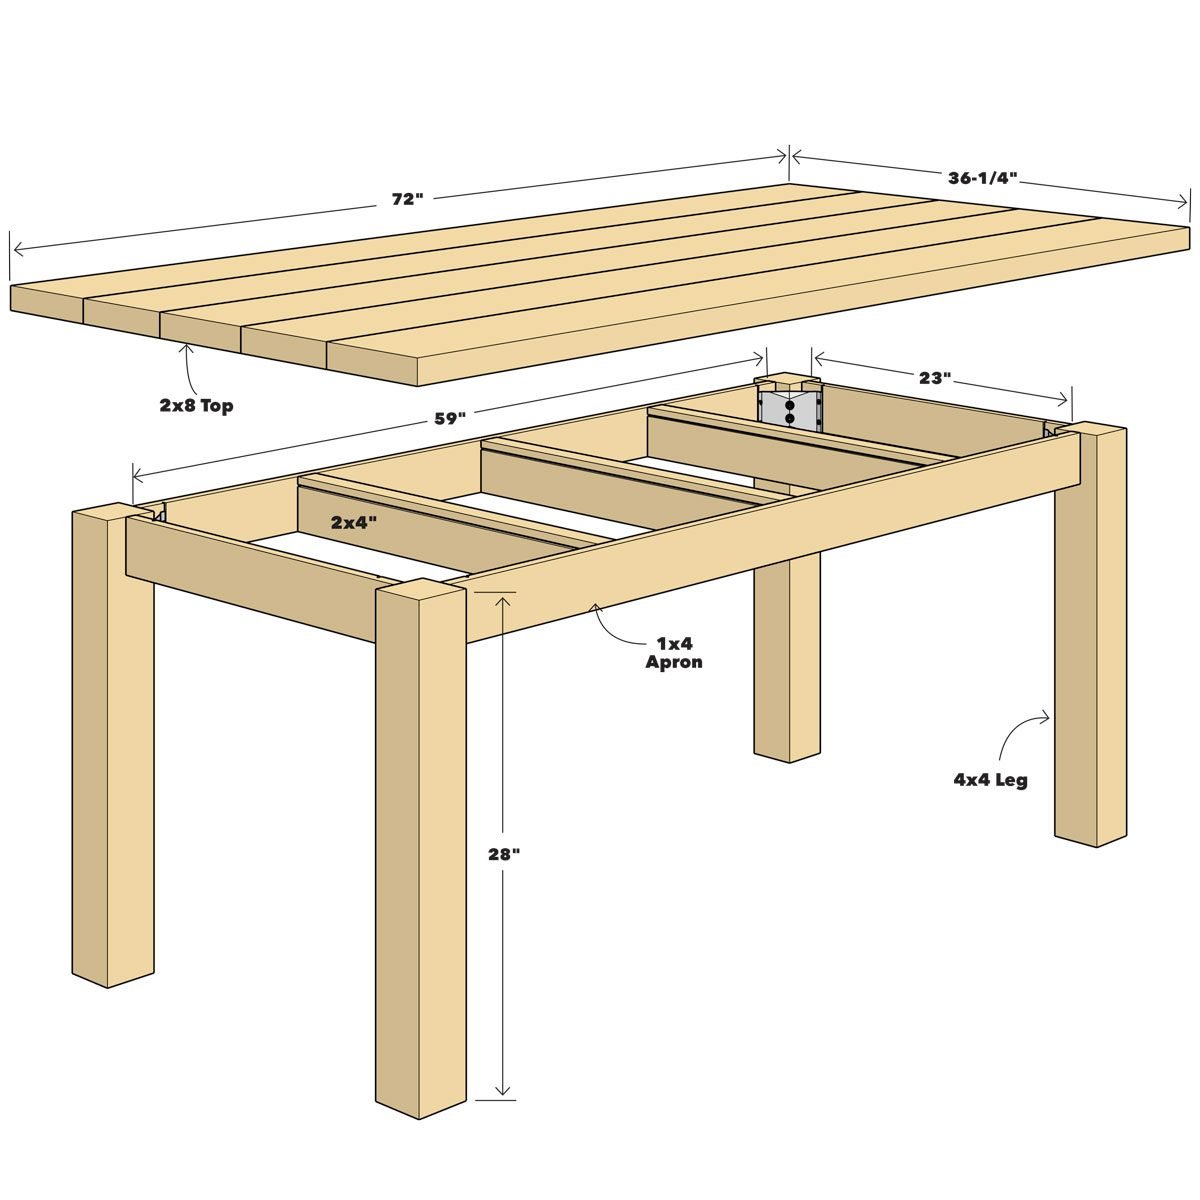 How to make a wooden table